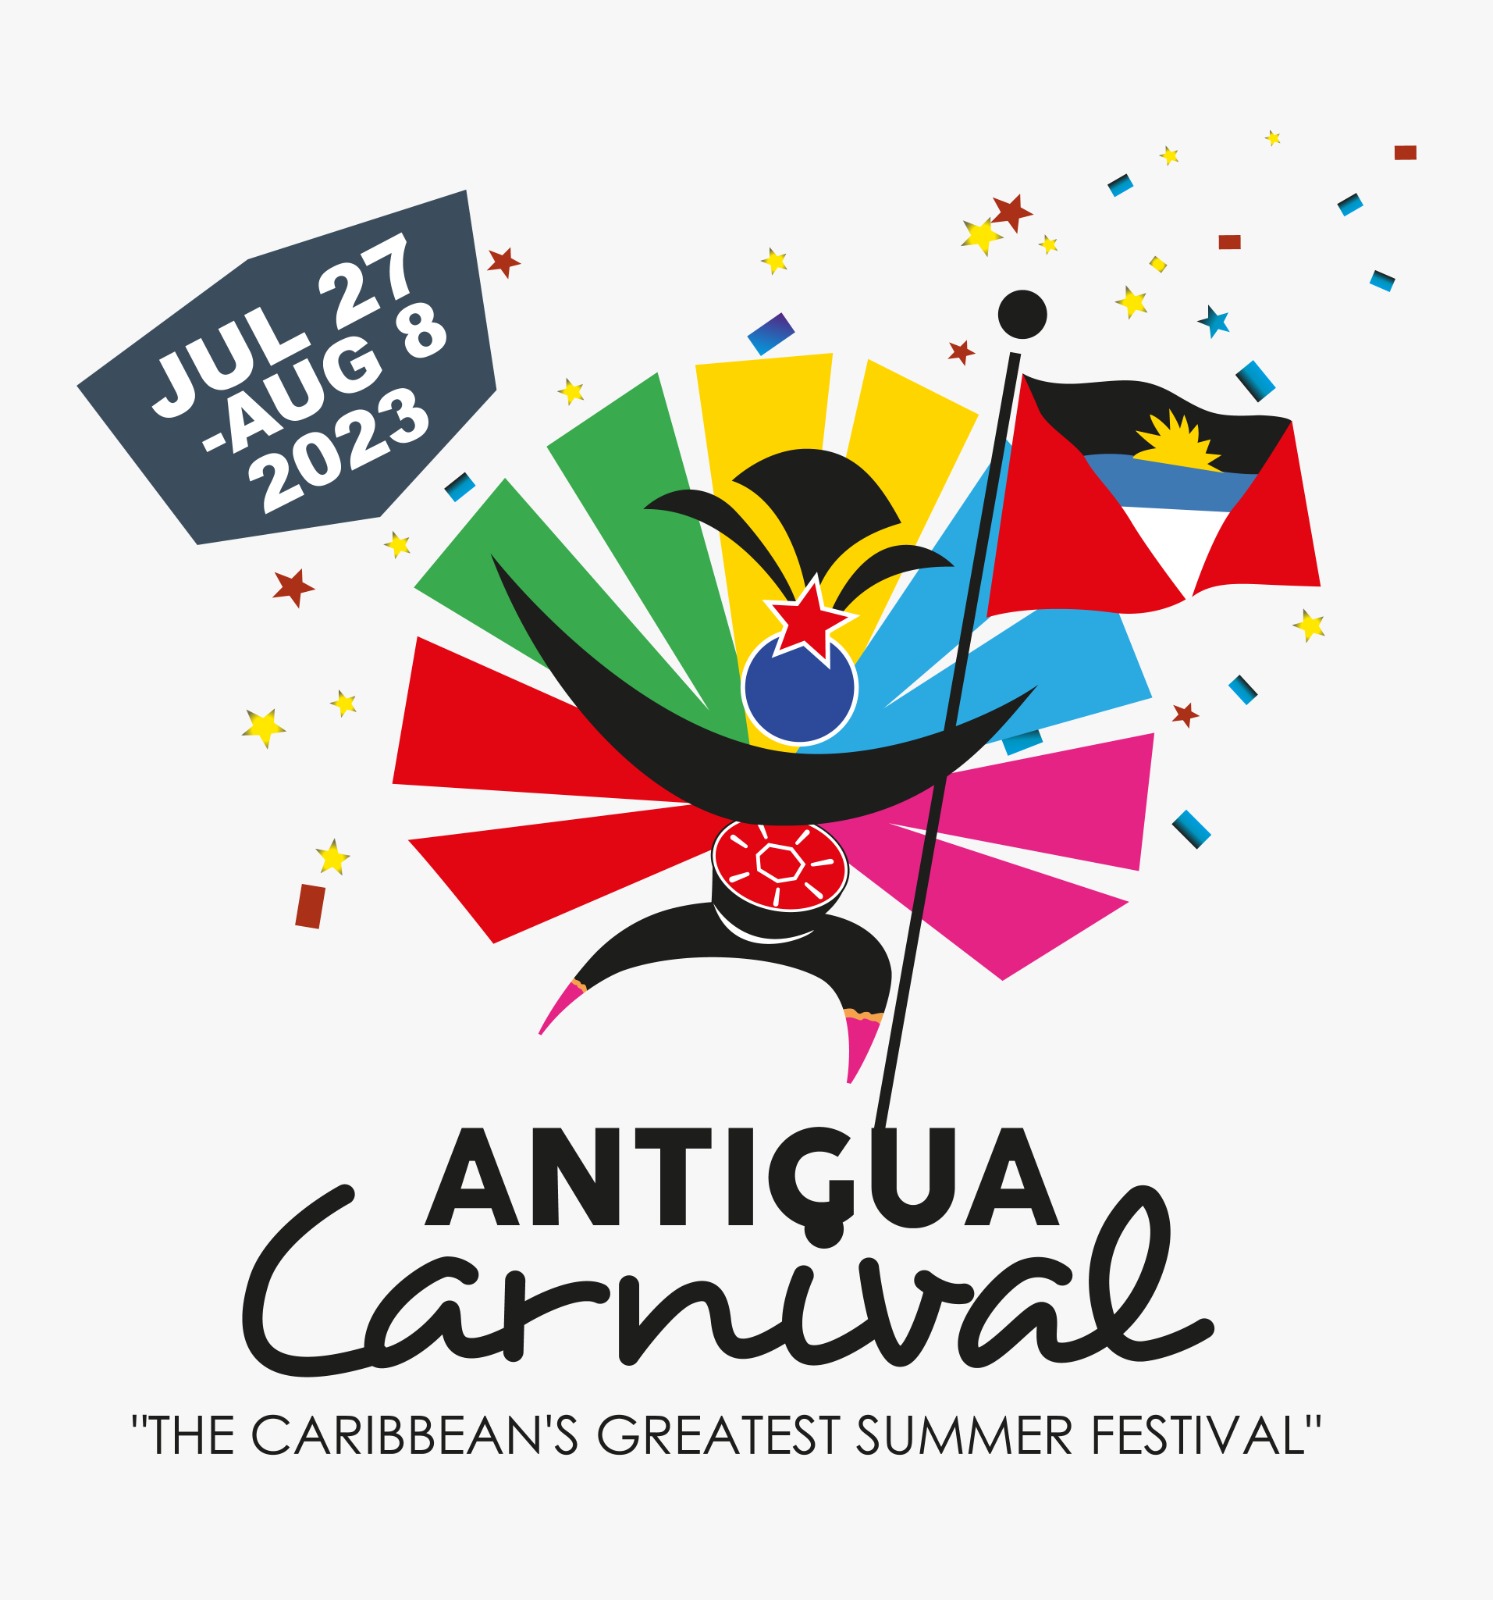 Official carnival tents get ready to roll out for Antigua Carnival 2023